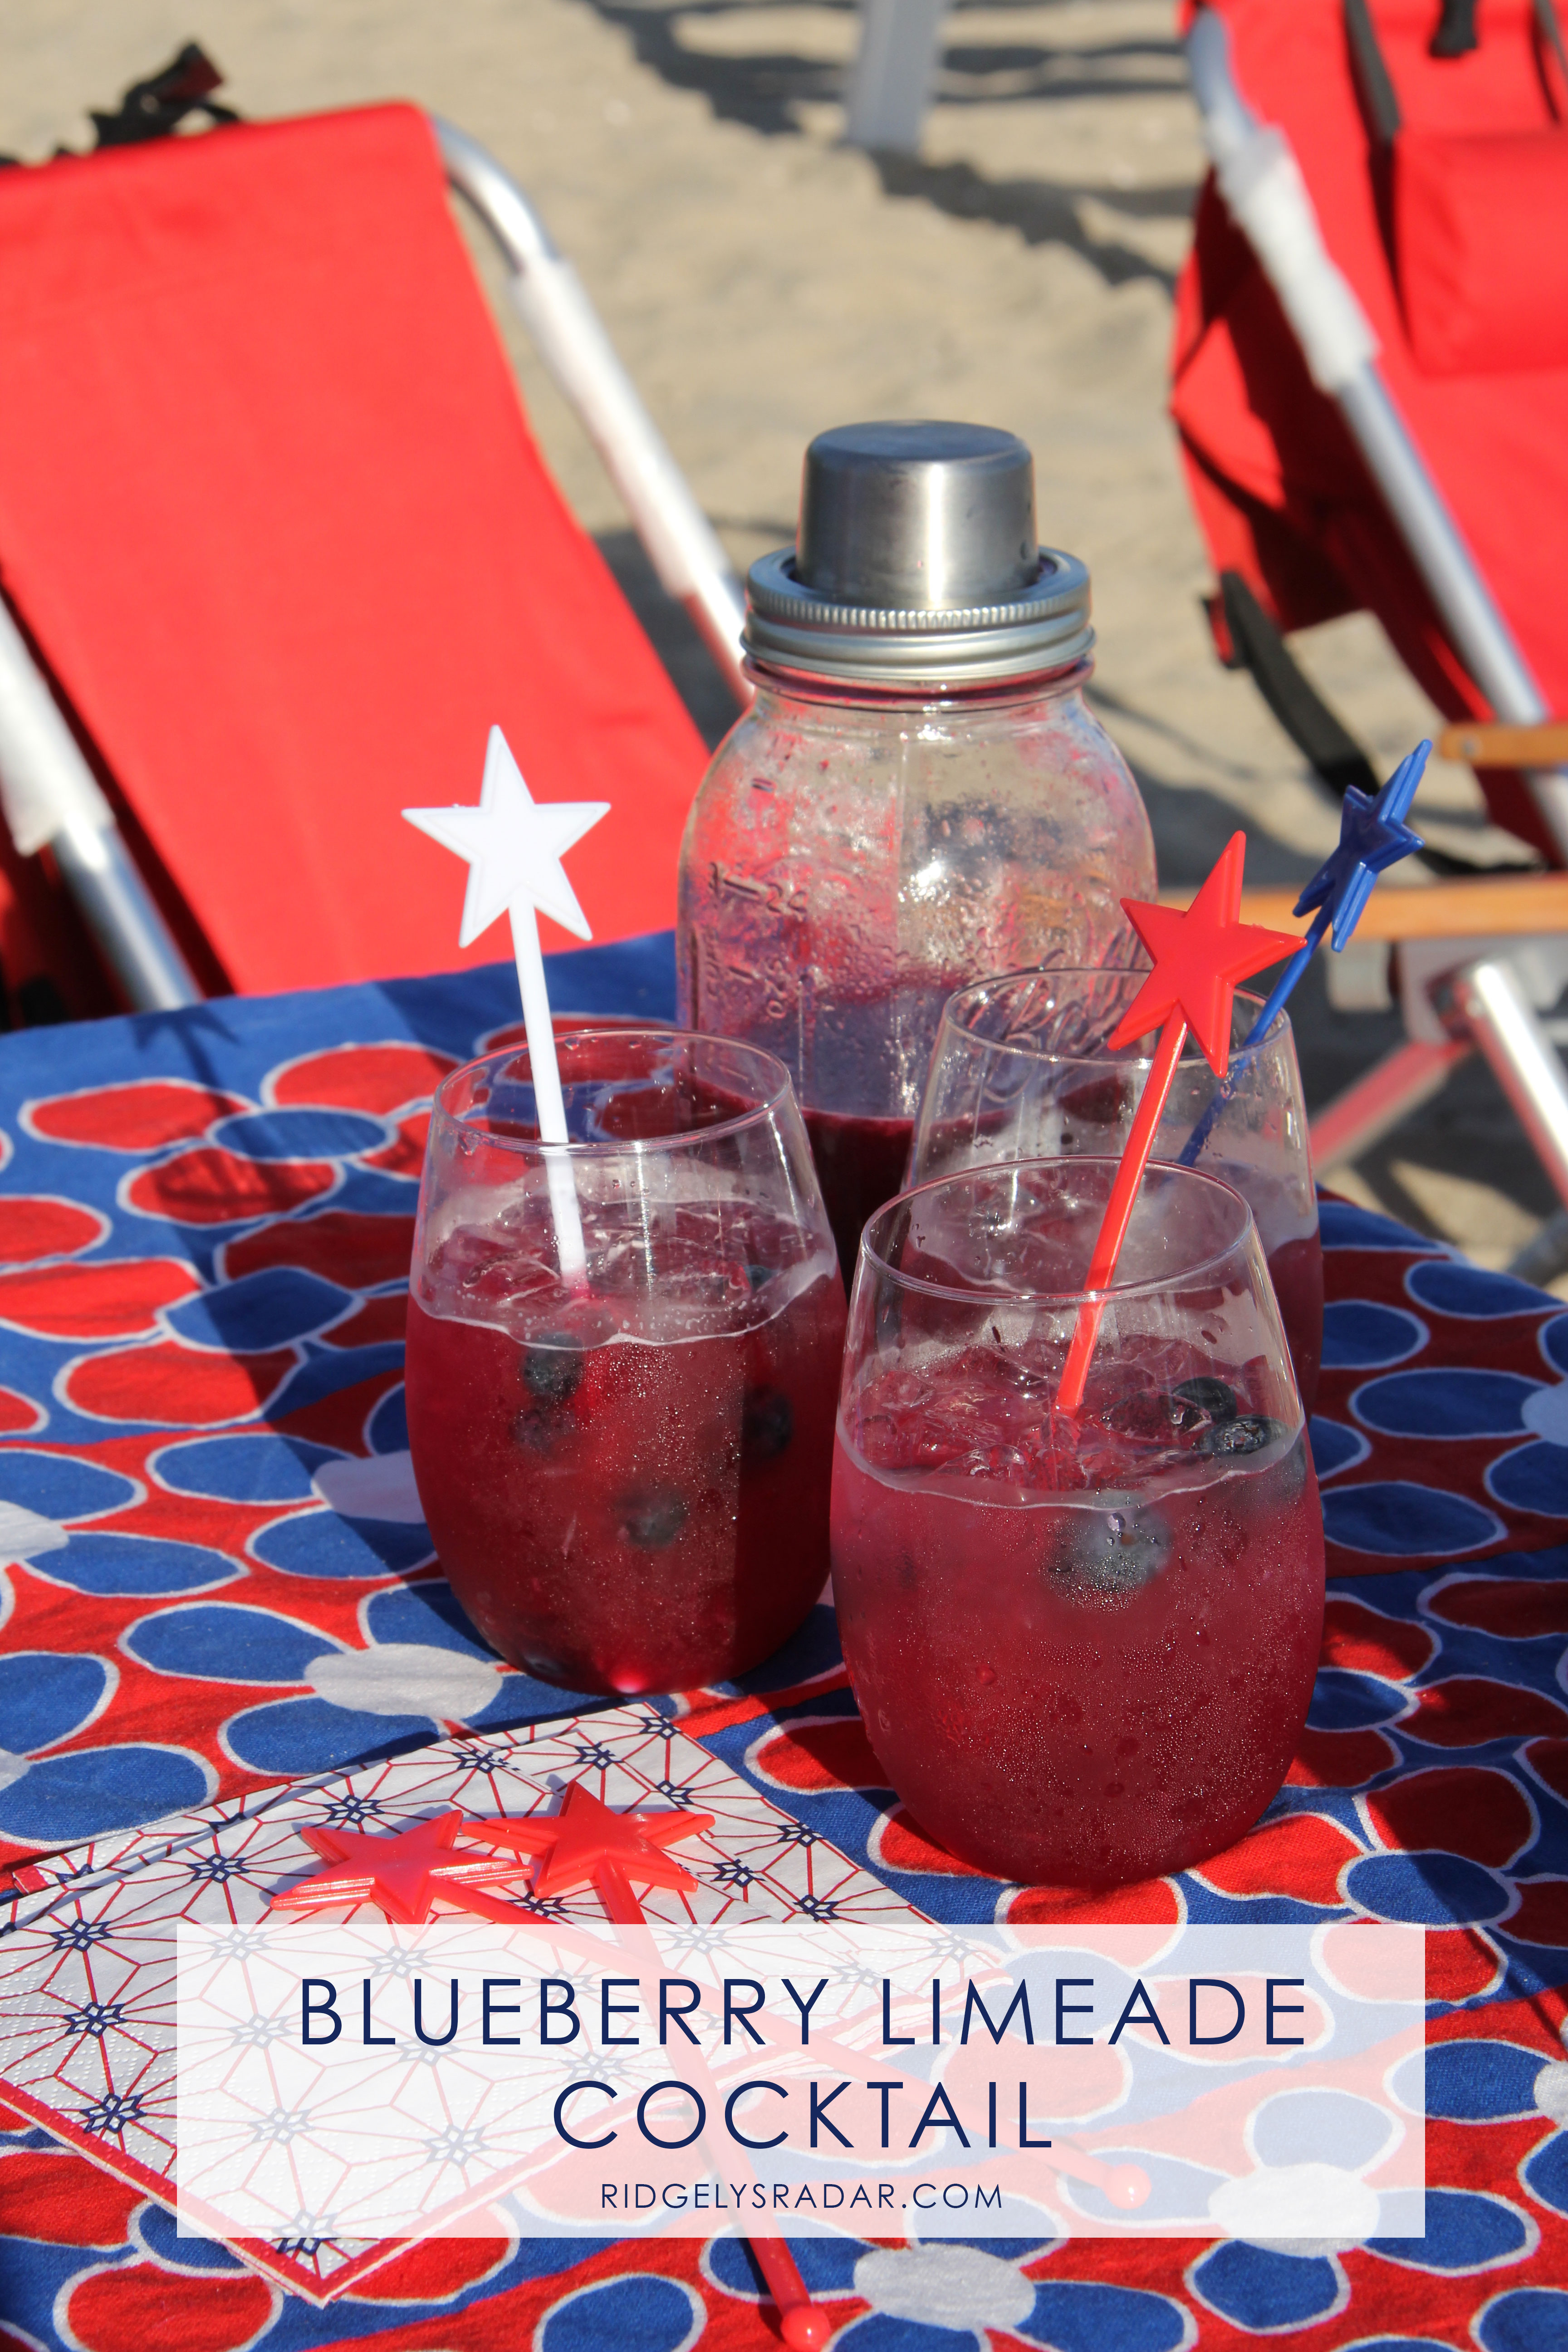 Serve up these fun Blueberry Limeade cocktails that taste delicious - looks festive and will quickly disappear! Get the recipe for your July 4th Party!